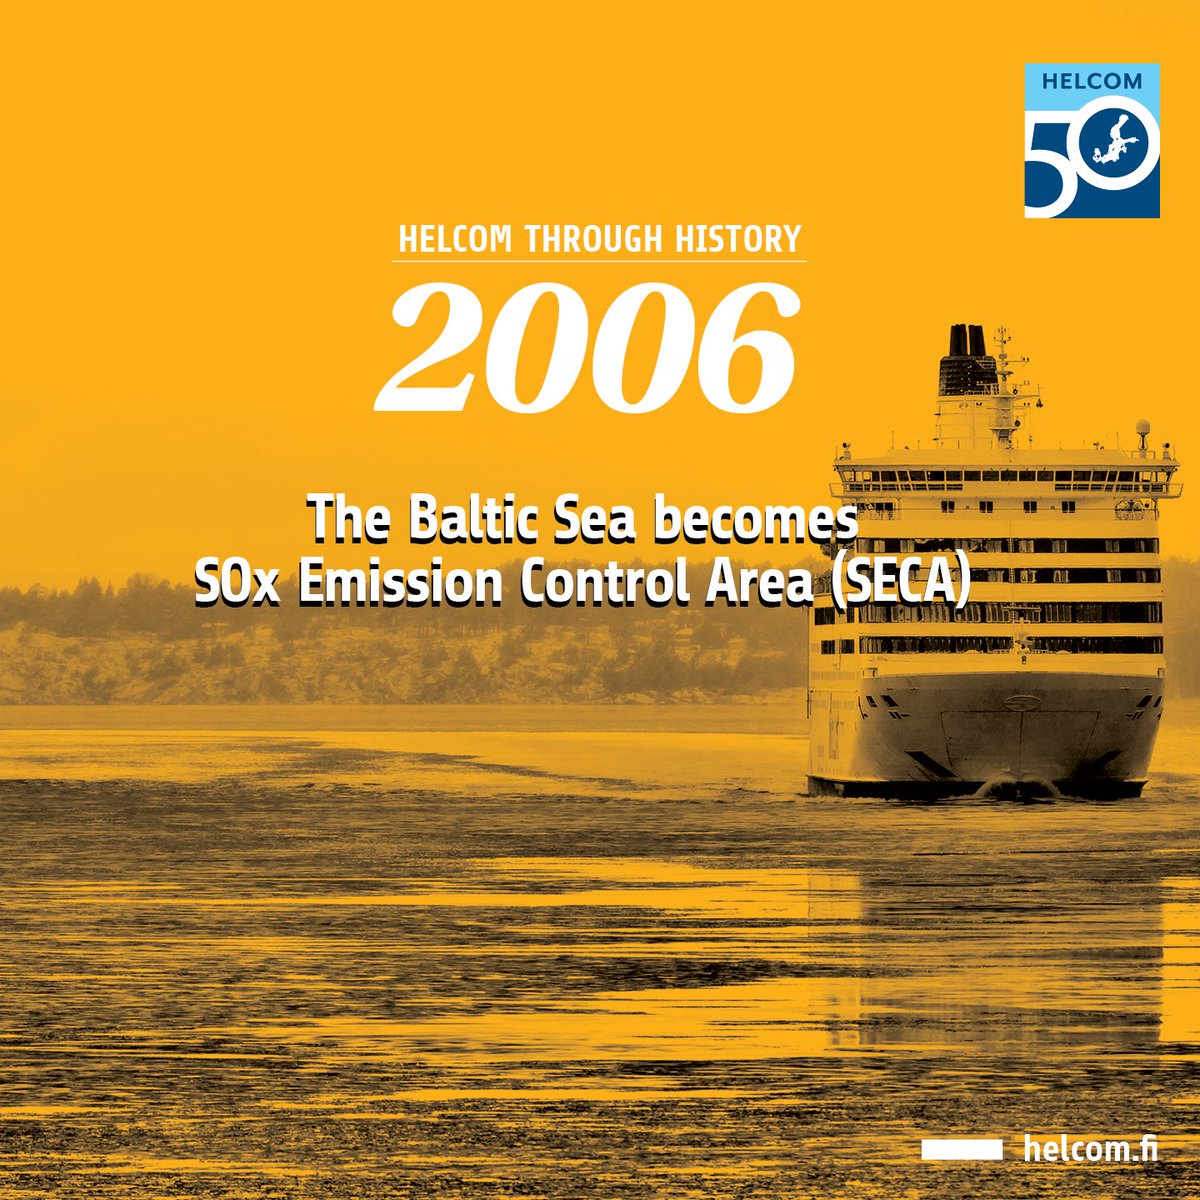 🕰️It’s HELCOM Through History time! 🕰️ Shipping exhaust gas emissions are key pollution sources in the Baltic Sea. The Baltic Sea SOx Emission Control Area aims to reduce sulphur oxides emissions, marking a crucial step in environmental regulations. #HELCOMThroughHistory